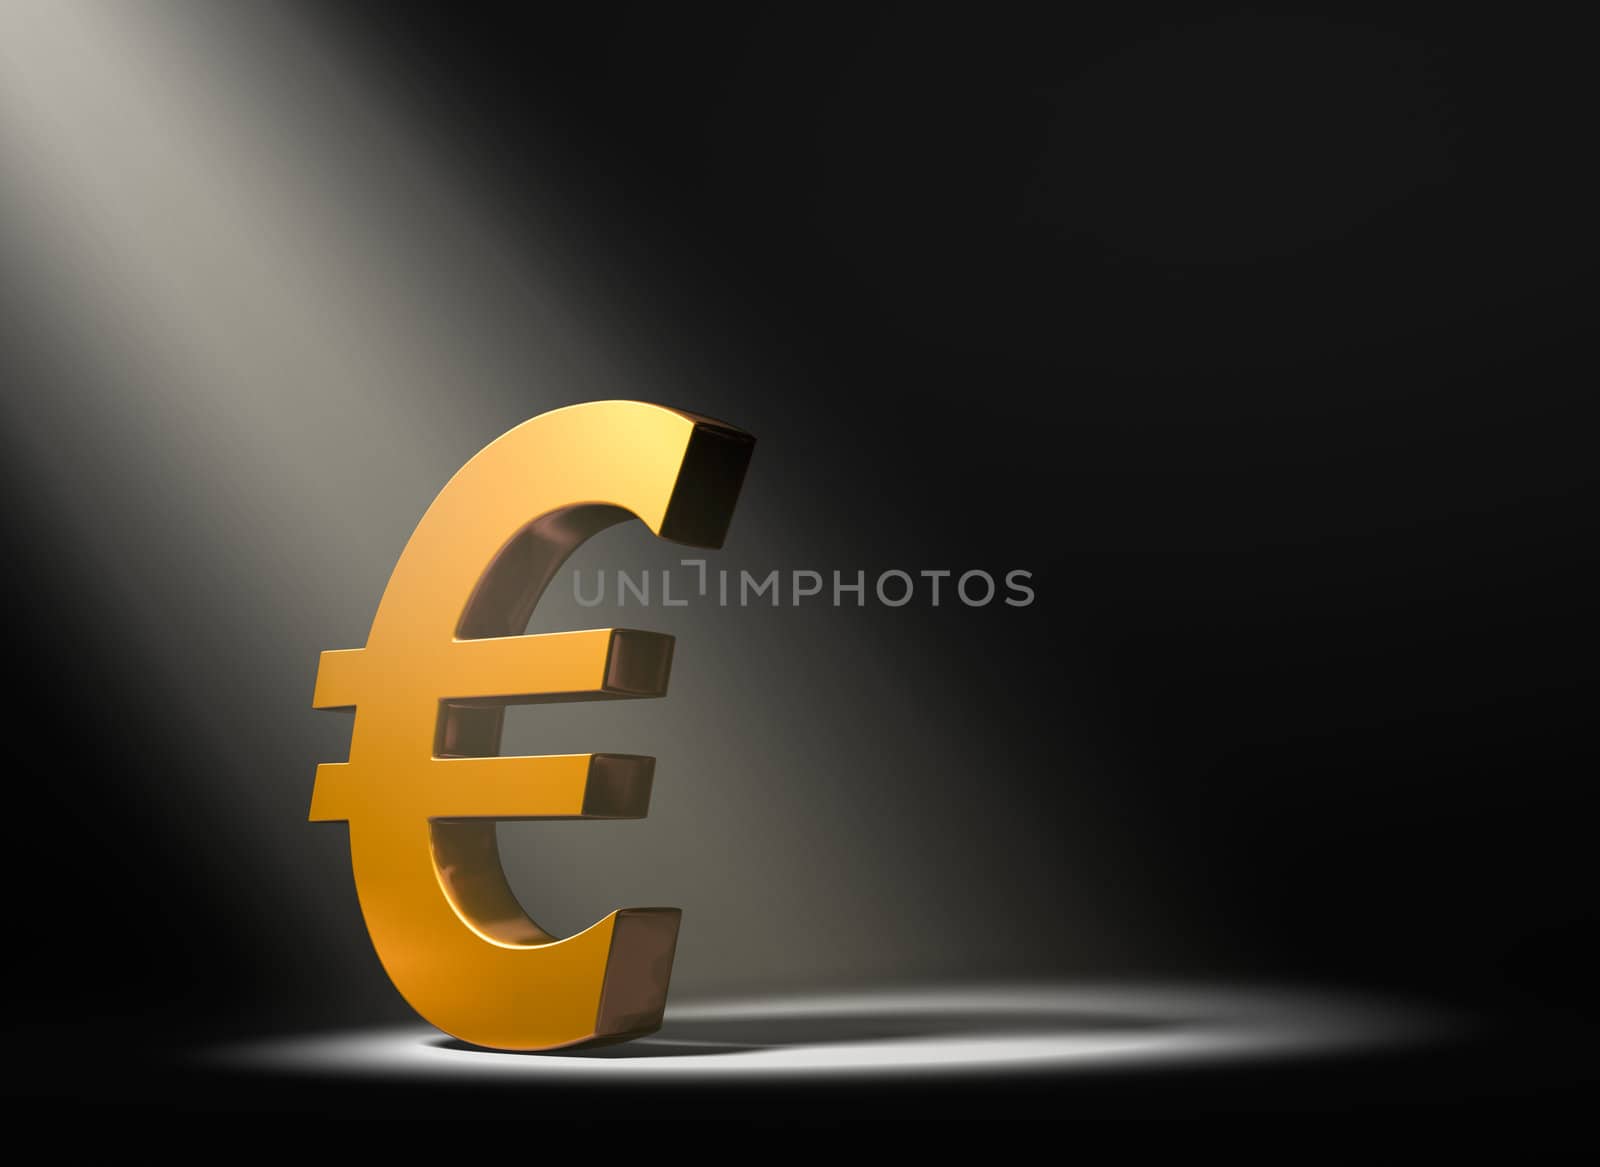 A gold Euro symbol on a black background and illuminated by a single, yellow spotlight.